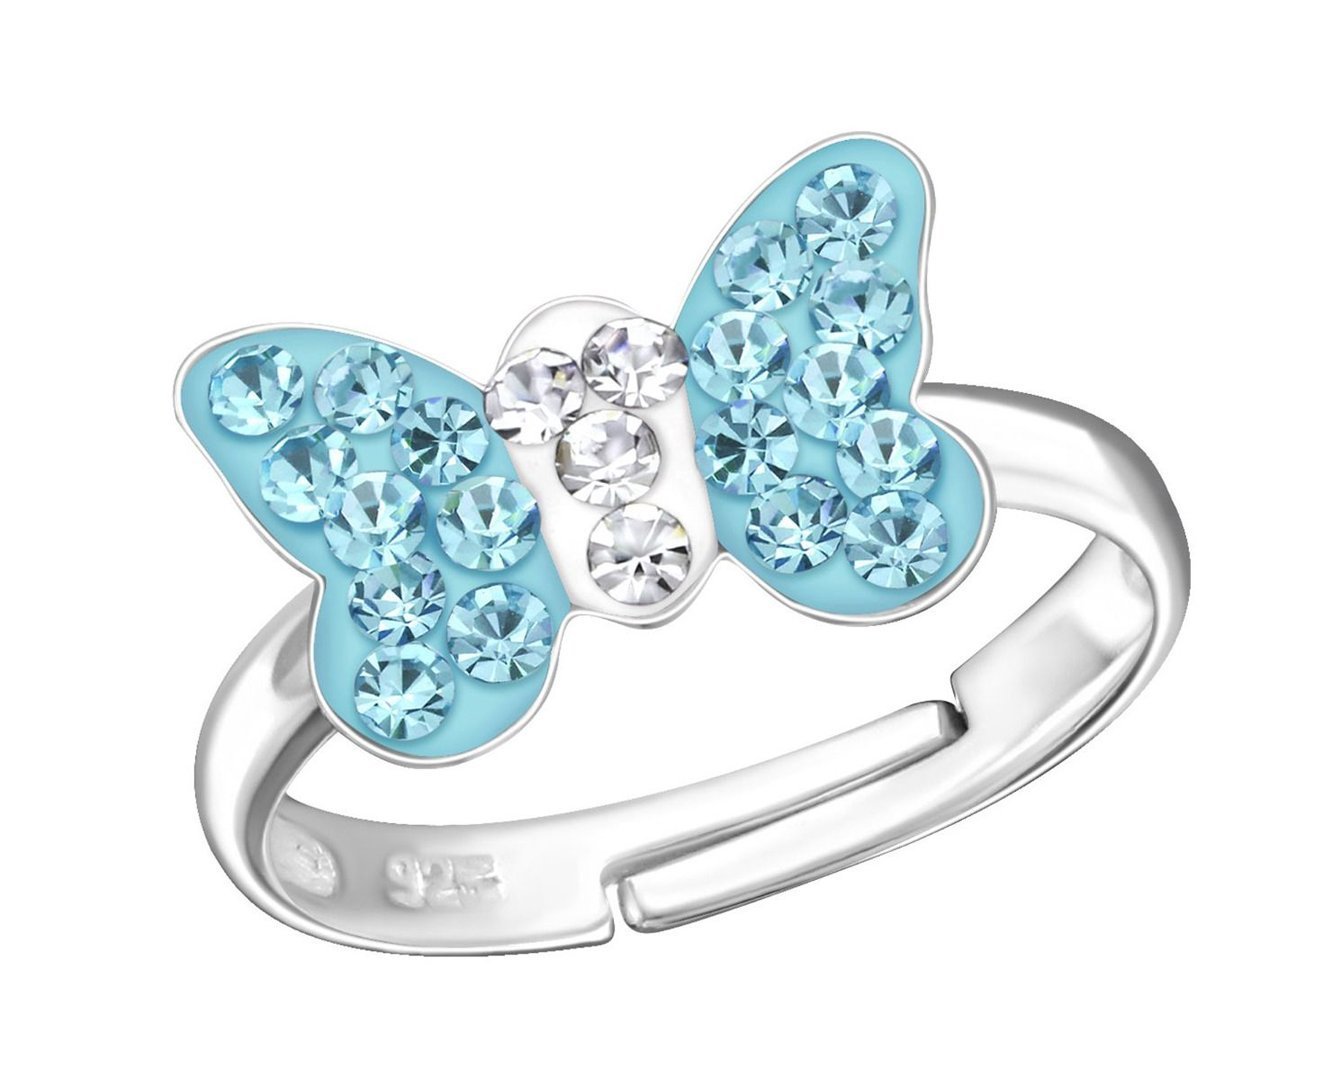 Children's Sterling Silver Butterfly Ring